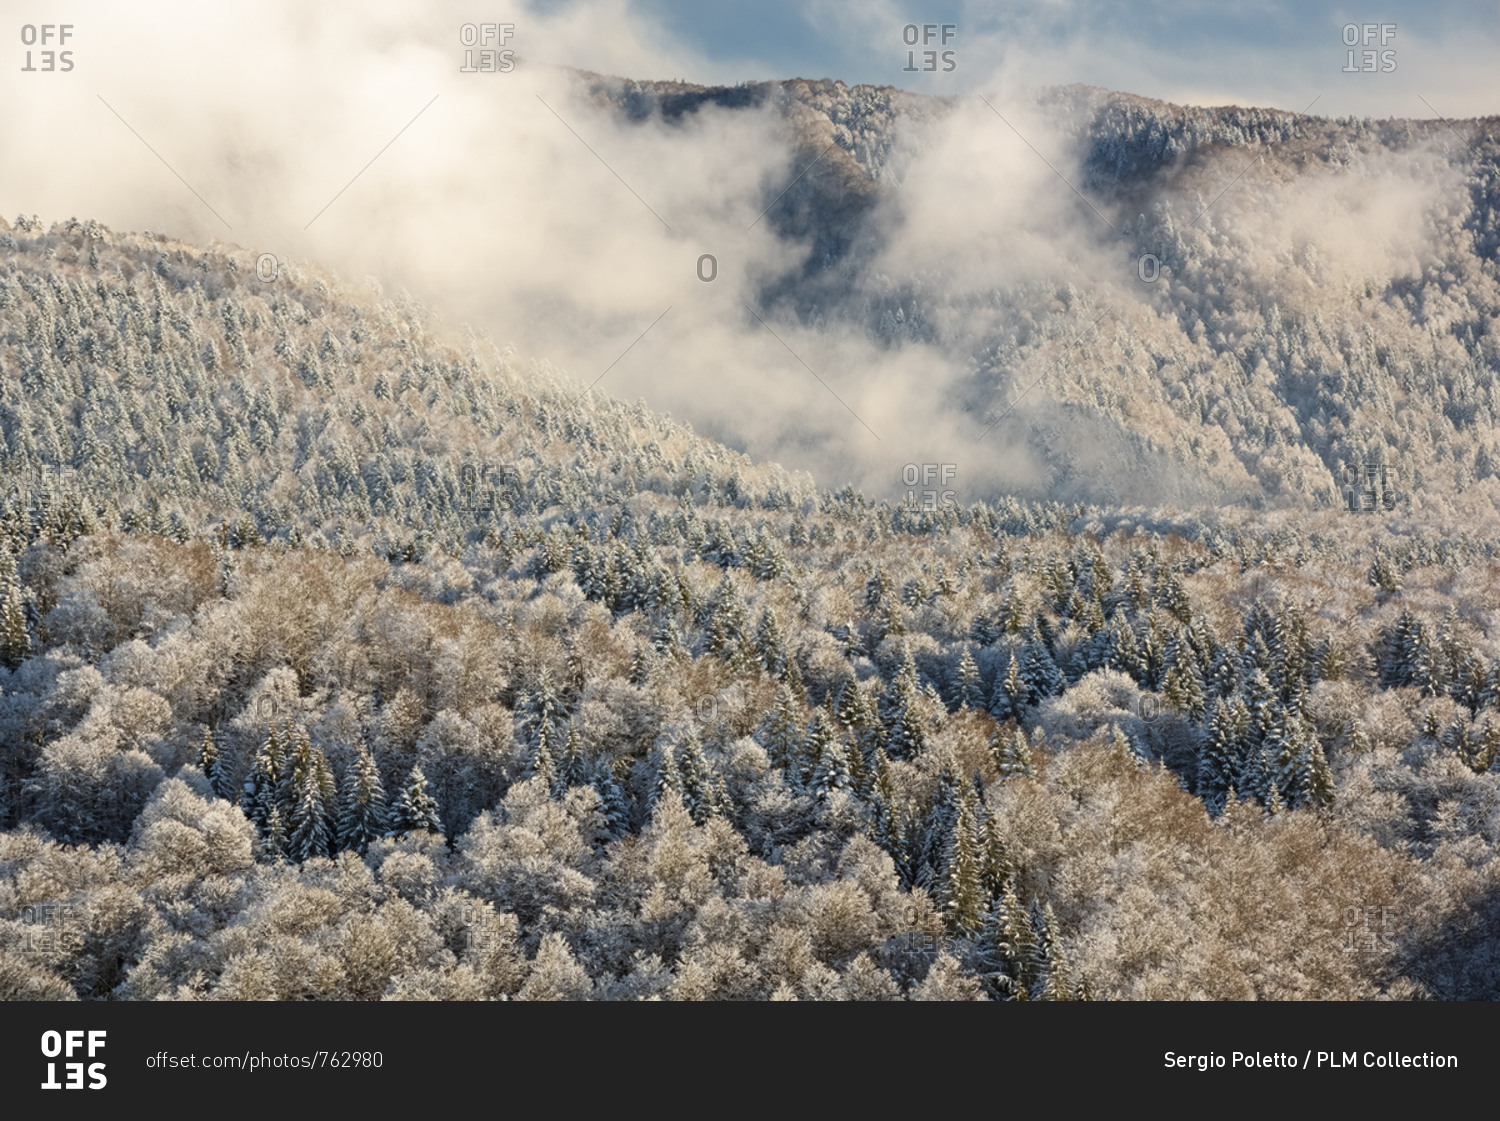 Heavy snowfall in the forest of Alpago near Cansiglio Forest. Low clouds, fog, wind, and sudden rays of light changed the landscape aspect unceasingly, Belluno, Prealps, Veneto, Italy, Europe